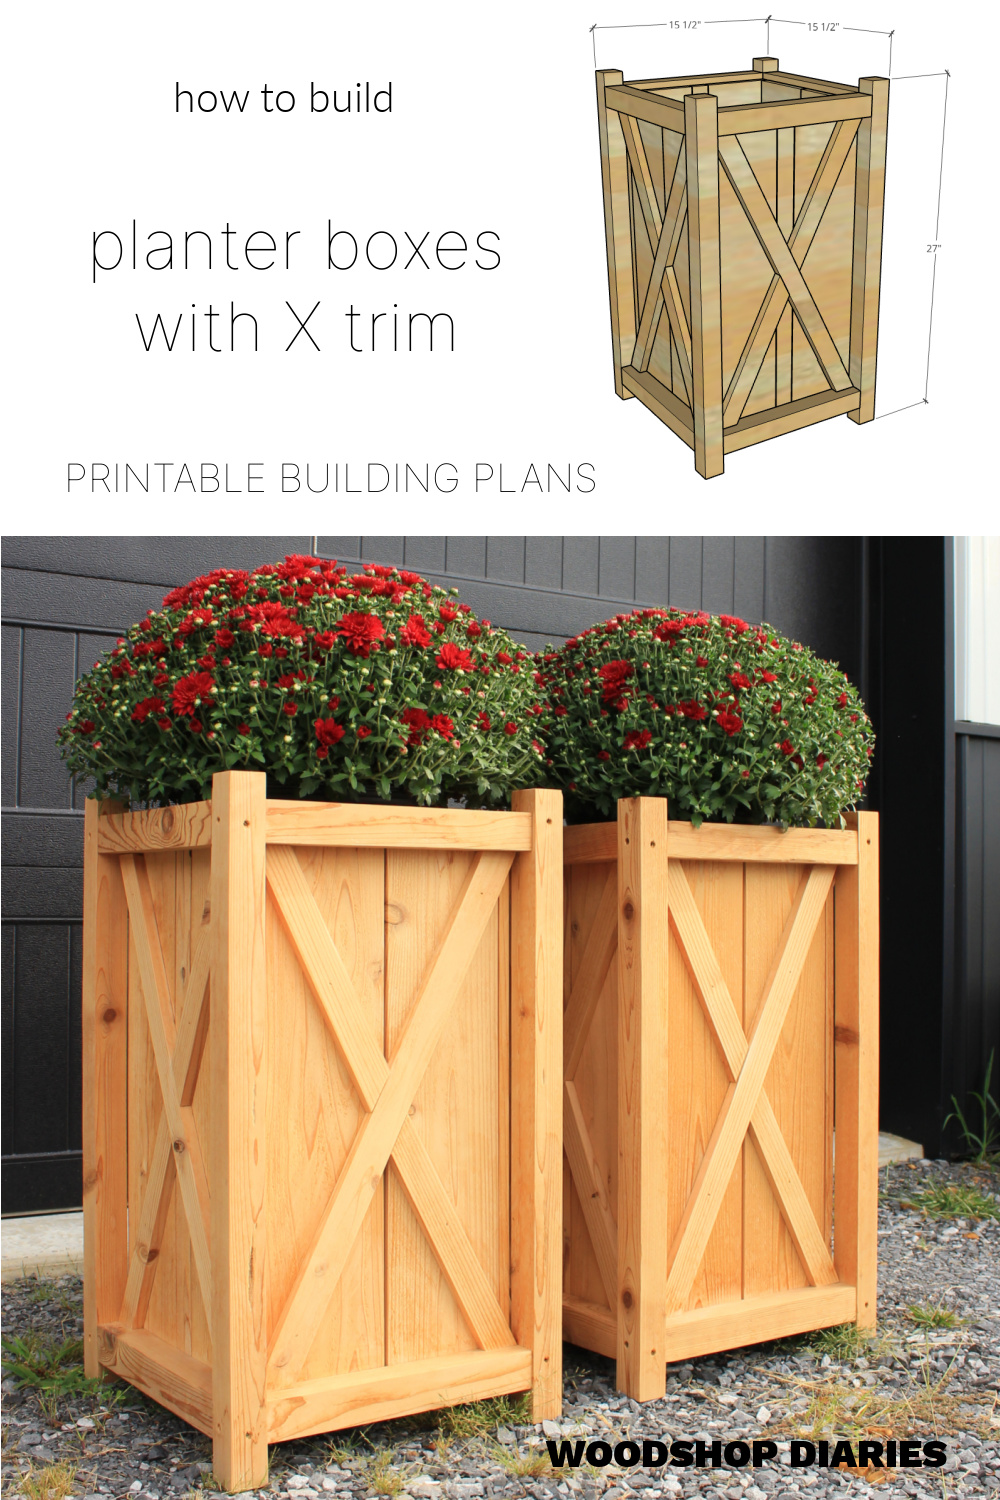 Pinterest image showing red mums in pair of wooden planters with overall dimension diagram at top with text "how to build planter boxes with X trim"